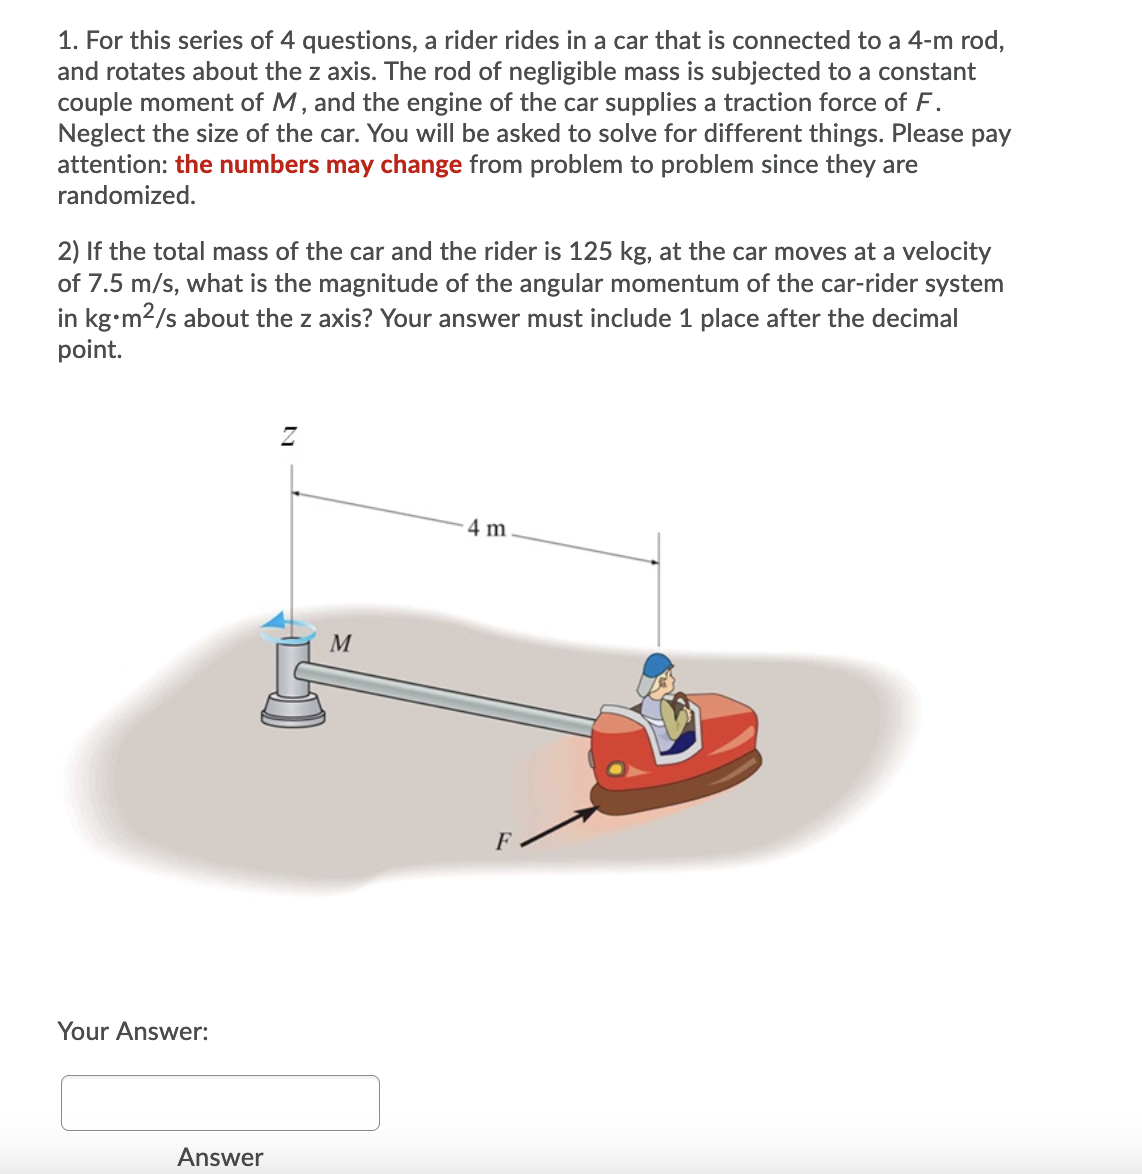 1. For this series of 4 questions, a rider rides in a car that is connected to a 4-m rod,
and rotates about the z axis. The rod of negligible mass is subjected to a constant
couple moment of M, and the engine of the car supplies a traction force of F.
Neglect the size of the car. You will be asked to solve for different things. Please pay
attention: the numbers may change from problem to problem since they are
randomized.
2) If the total mass of the car and the rider is 125 kg, at the car moves at a velocity
of 7.5 m/s, what is the magnitude of the angular momentum of the car-rider system
in kg•m2/s about the z axis? Your answer must include 1 place after the decimal
point.
4 m
M
Your Answer:
Answer
